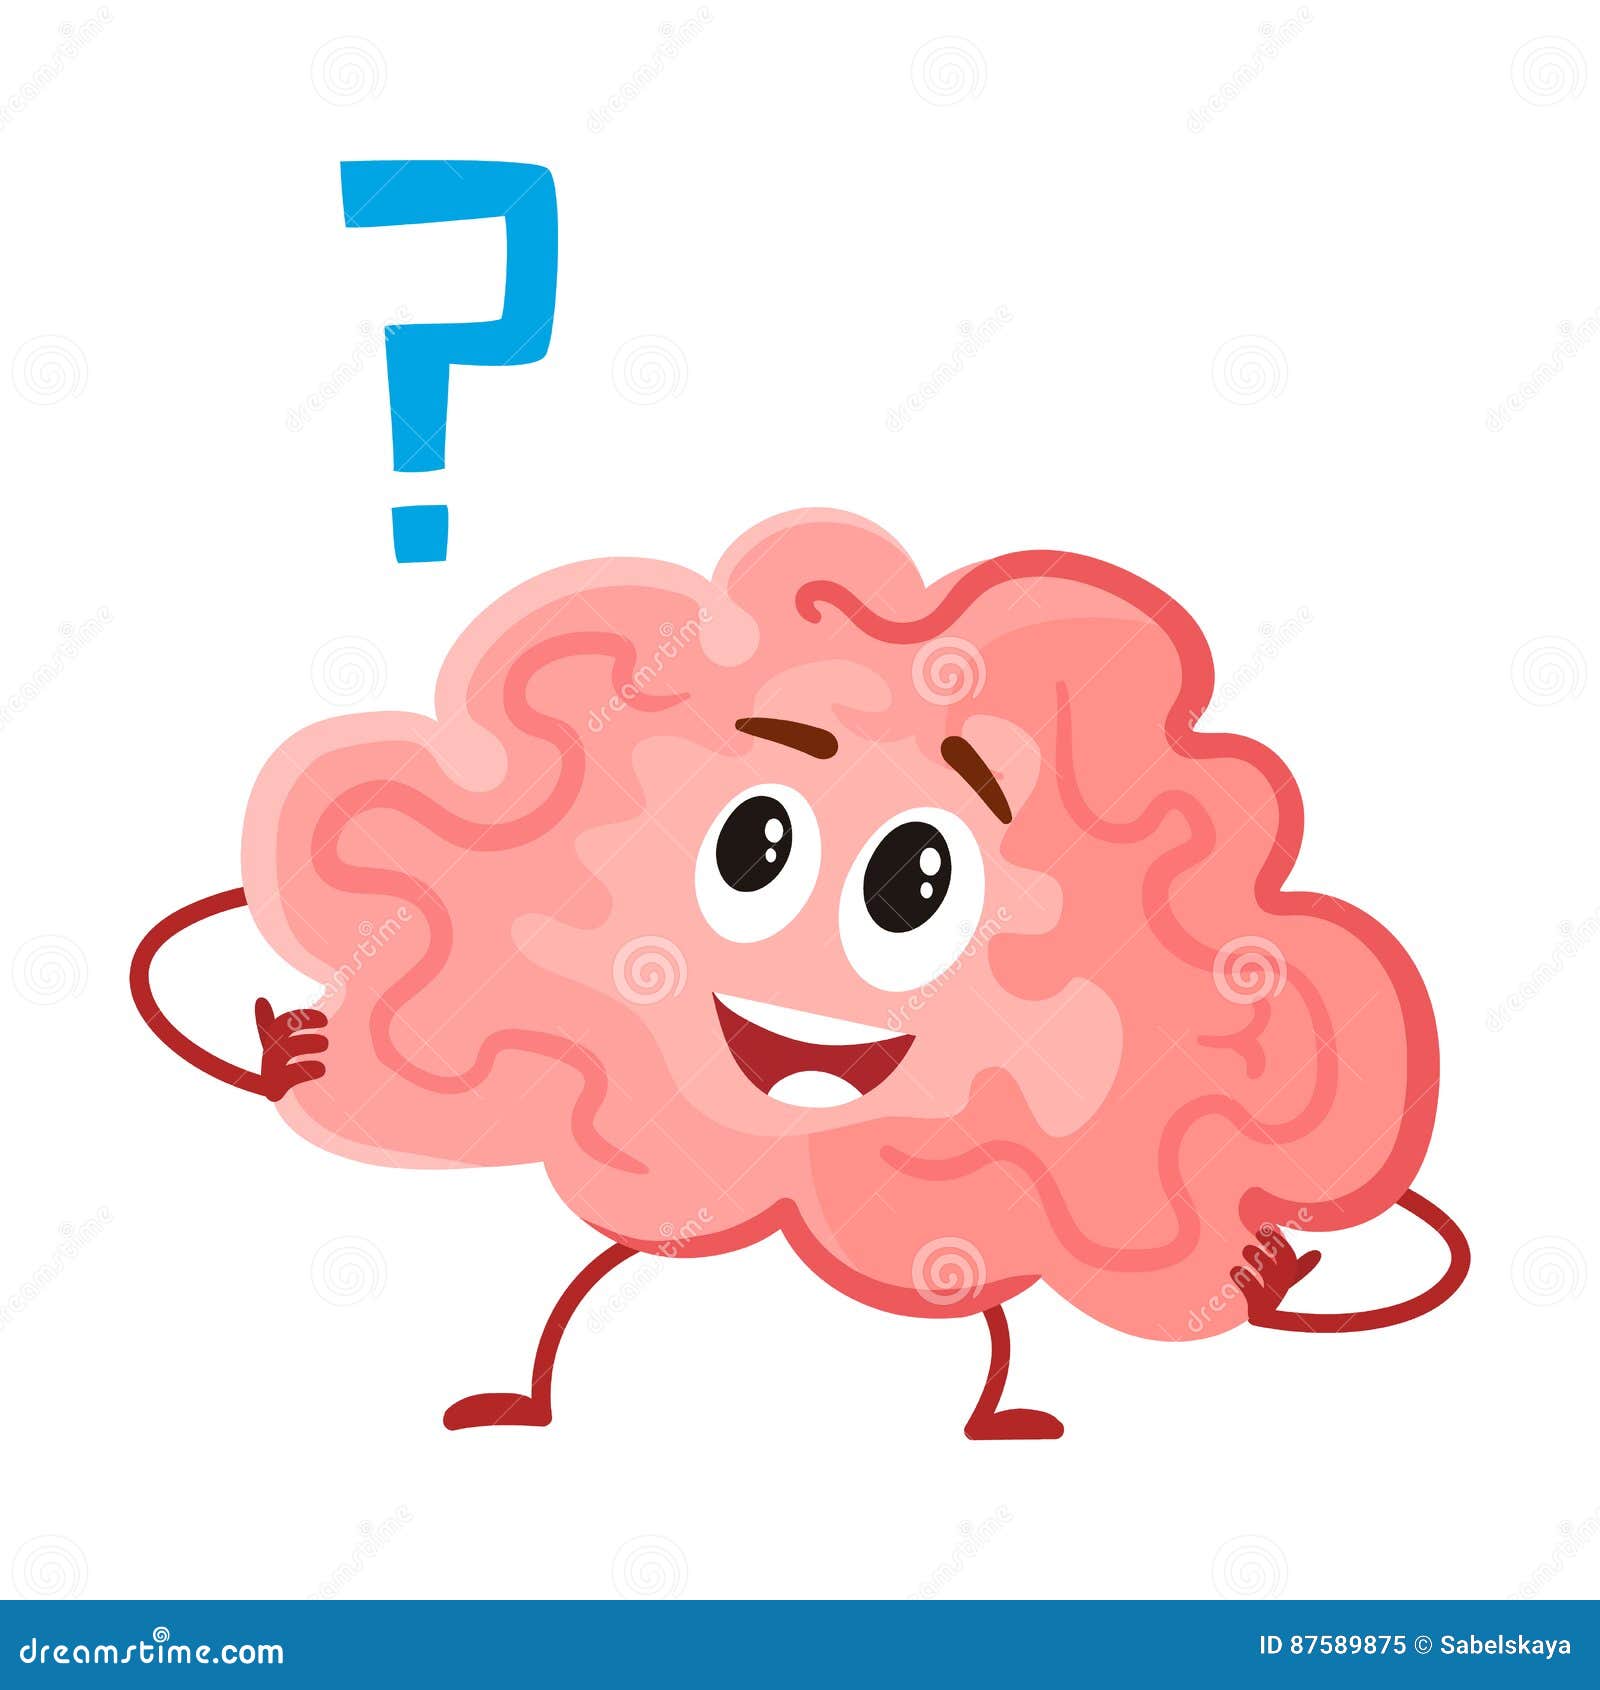 Cute and Funny, Smiling Human Brain Character, Intellectual, Thinking ...